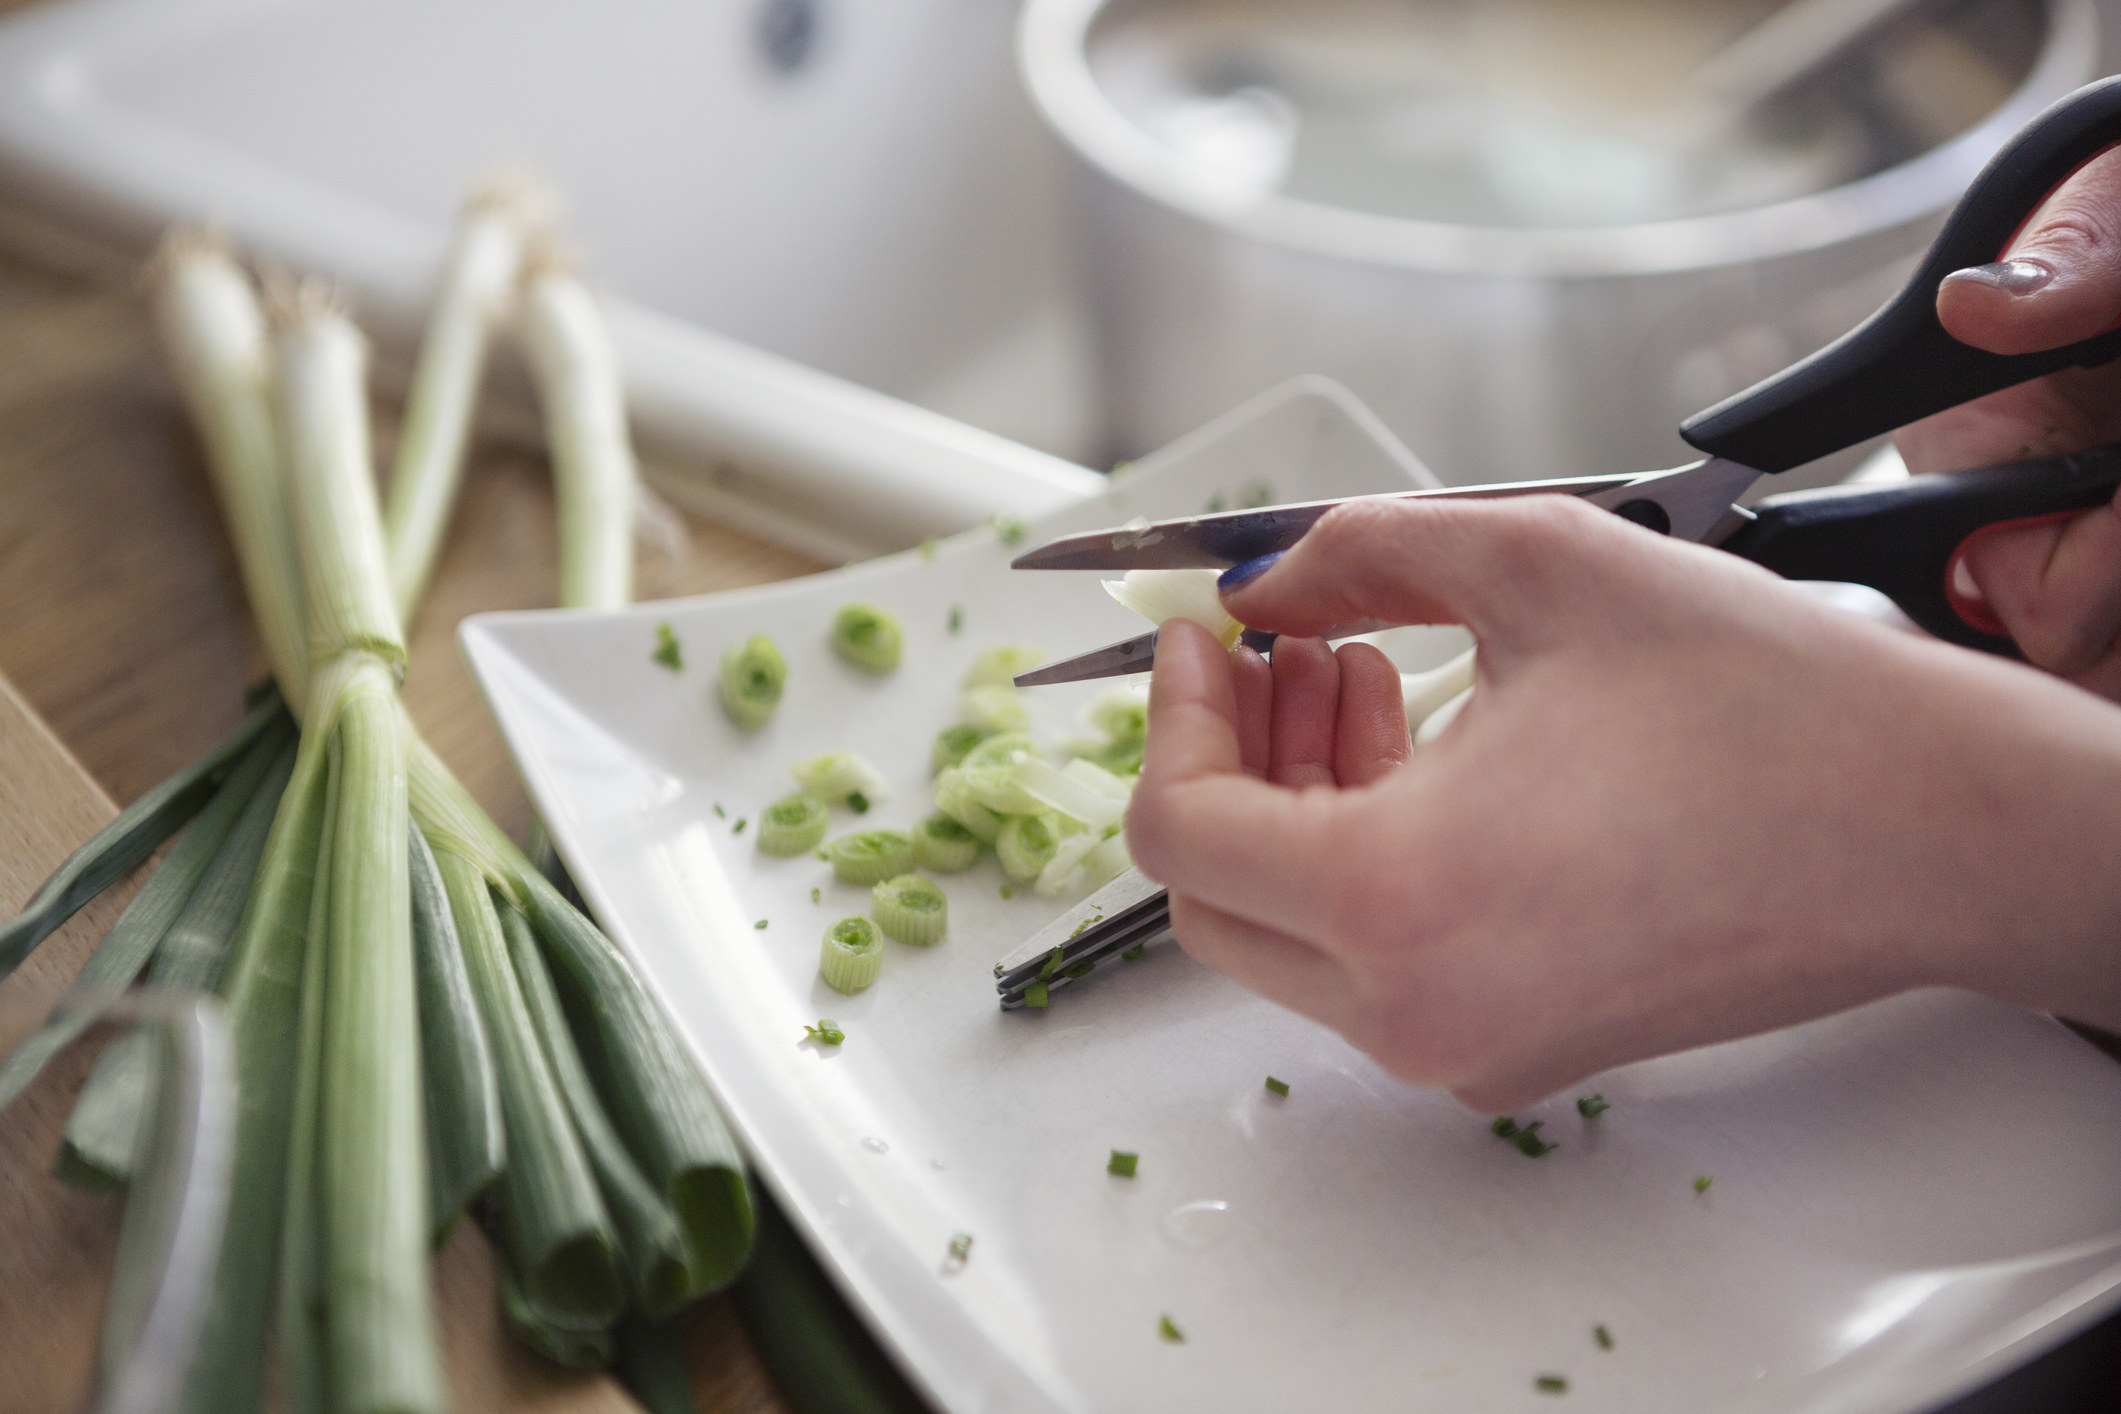 hands using scissors to cut up green onions